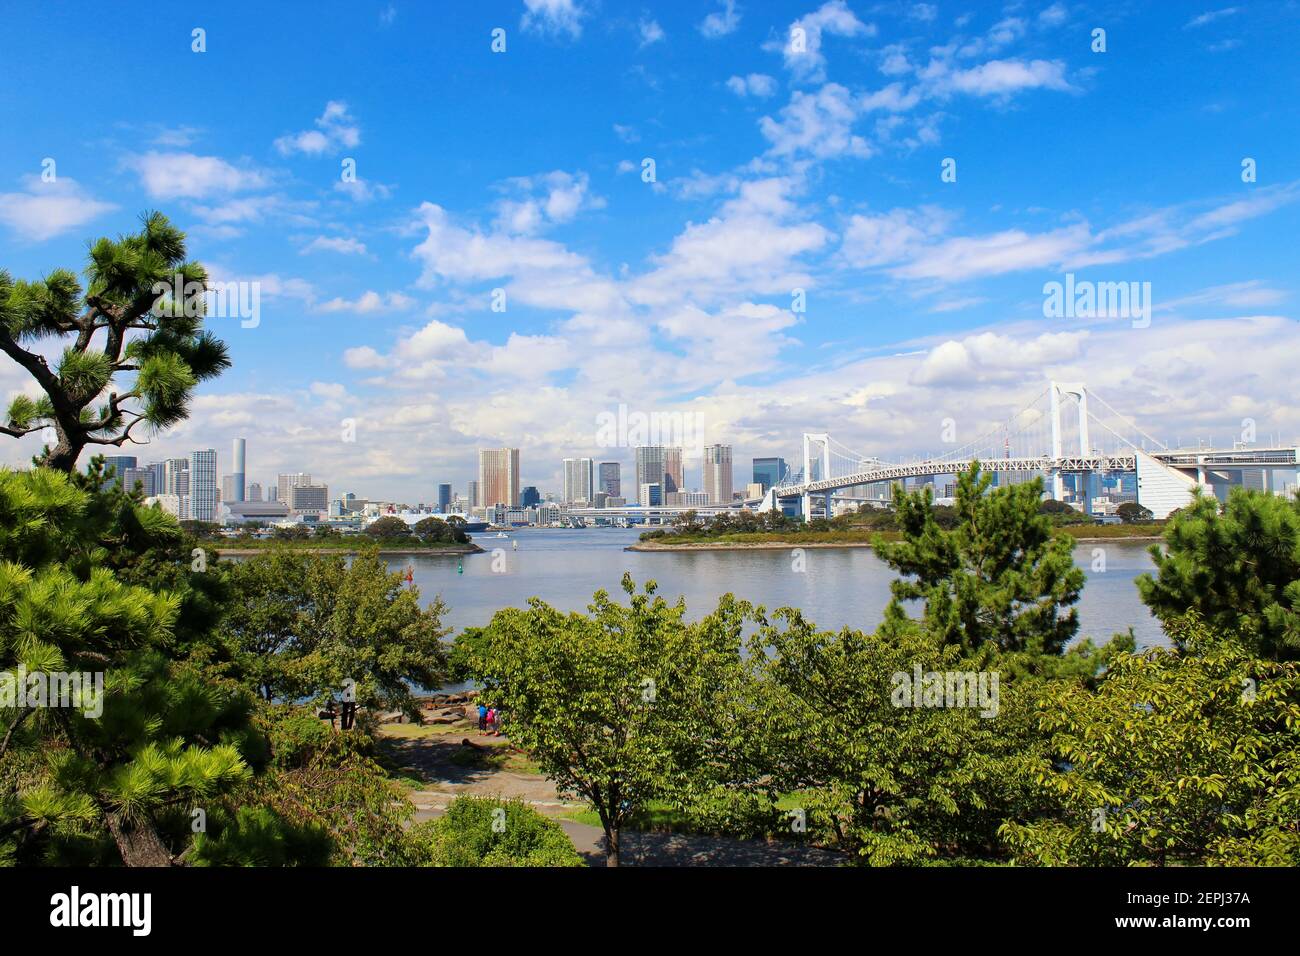 Panoramic view of Odaiba with Rainbow Bridge. Odaiba is a man-made island in Tokyo Bay and a popular entertainment and shopping district. Stock Photo